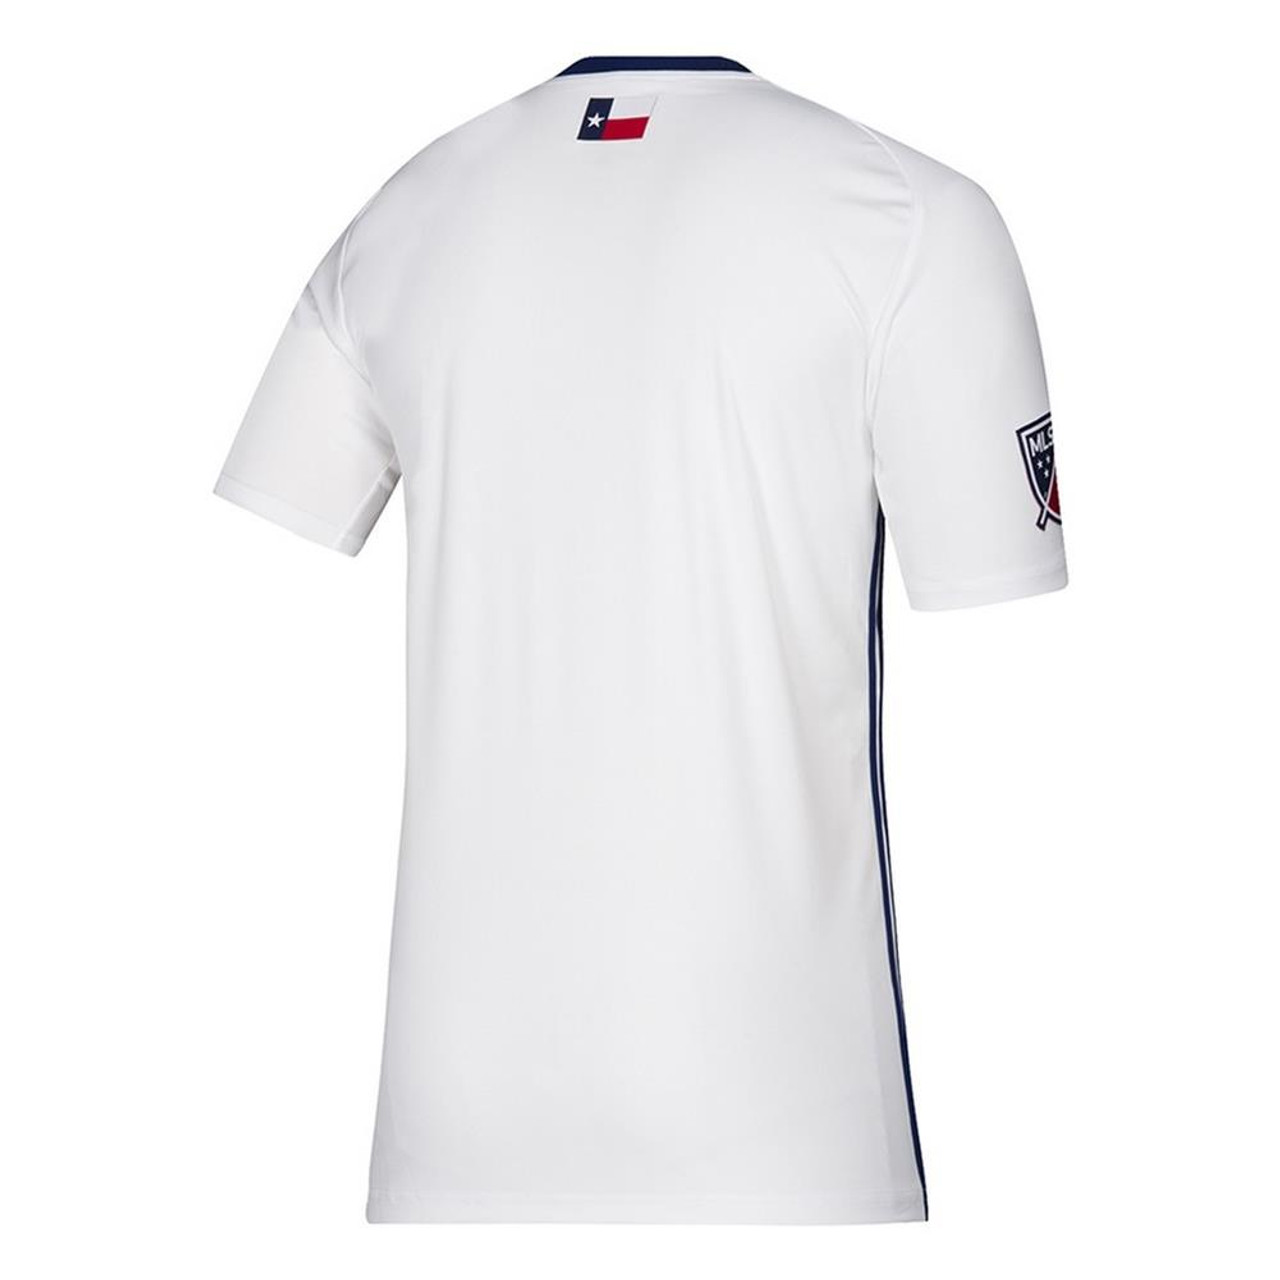 Adidas LAFC Away Authentic Jersey White 2019 - Grey